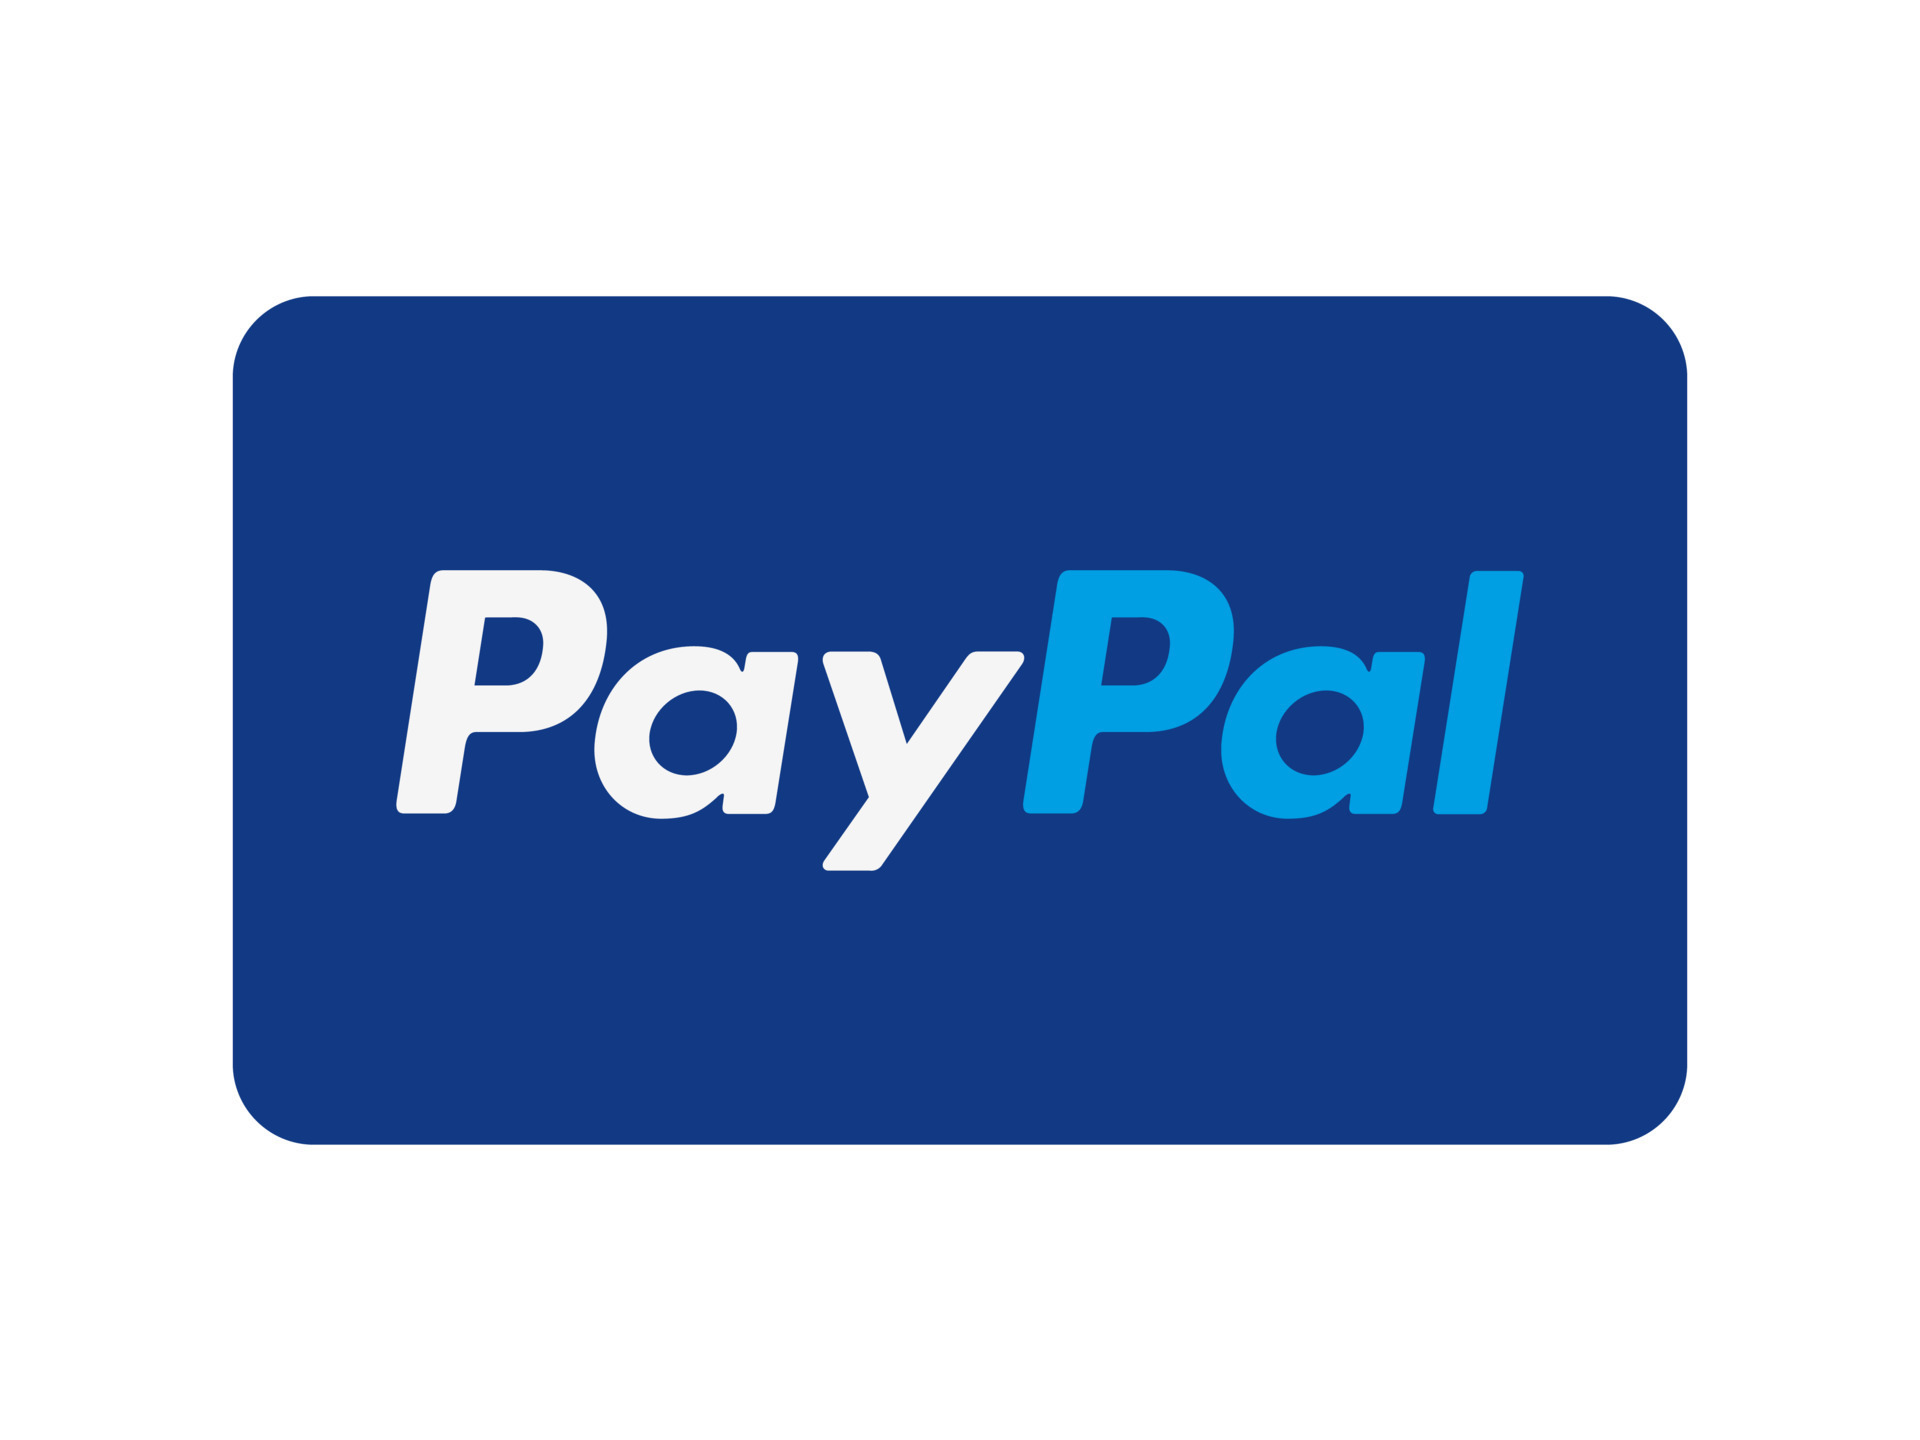 PayPal账号<span style='color:red;'>被</span>关联！跨境卖家<span style='color:red;'>如何</span>自救？关于PayPal防关联你<span style='color:red;'>不</span>得<span style='color:red;'>不</span><span style='color:red;'>知道</span><span style='color:red;'>的</span>事！